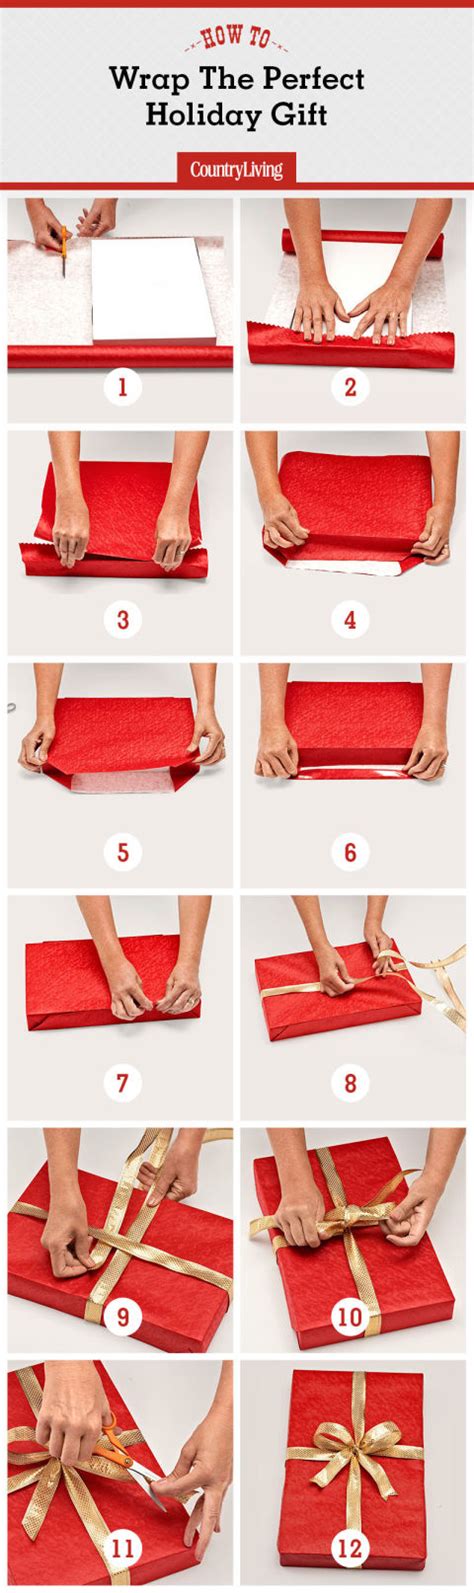 How To Wrap A Gift Wrapping A Present Step By Step Instructions With